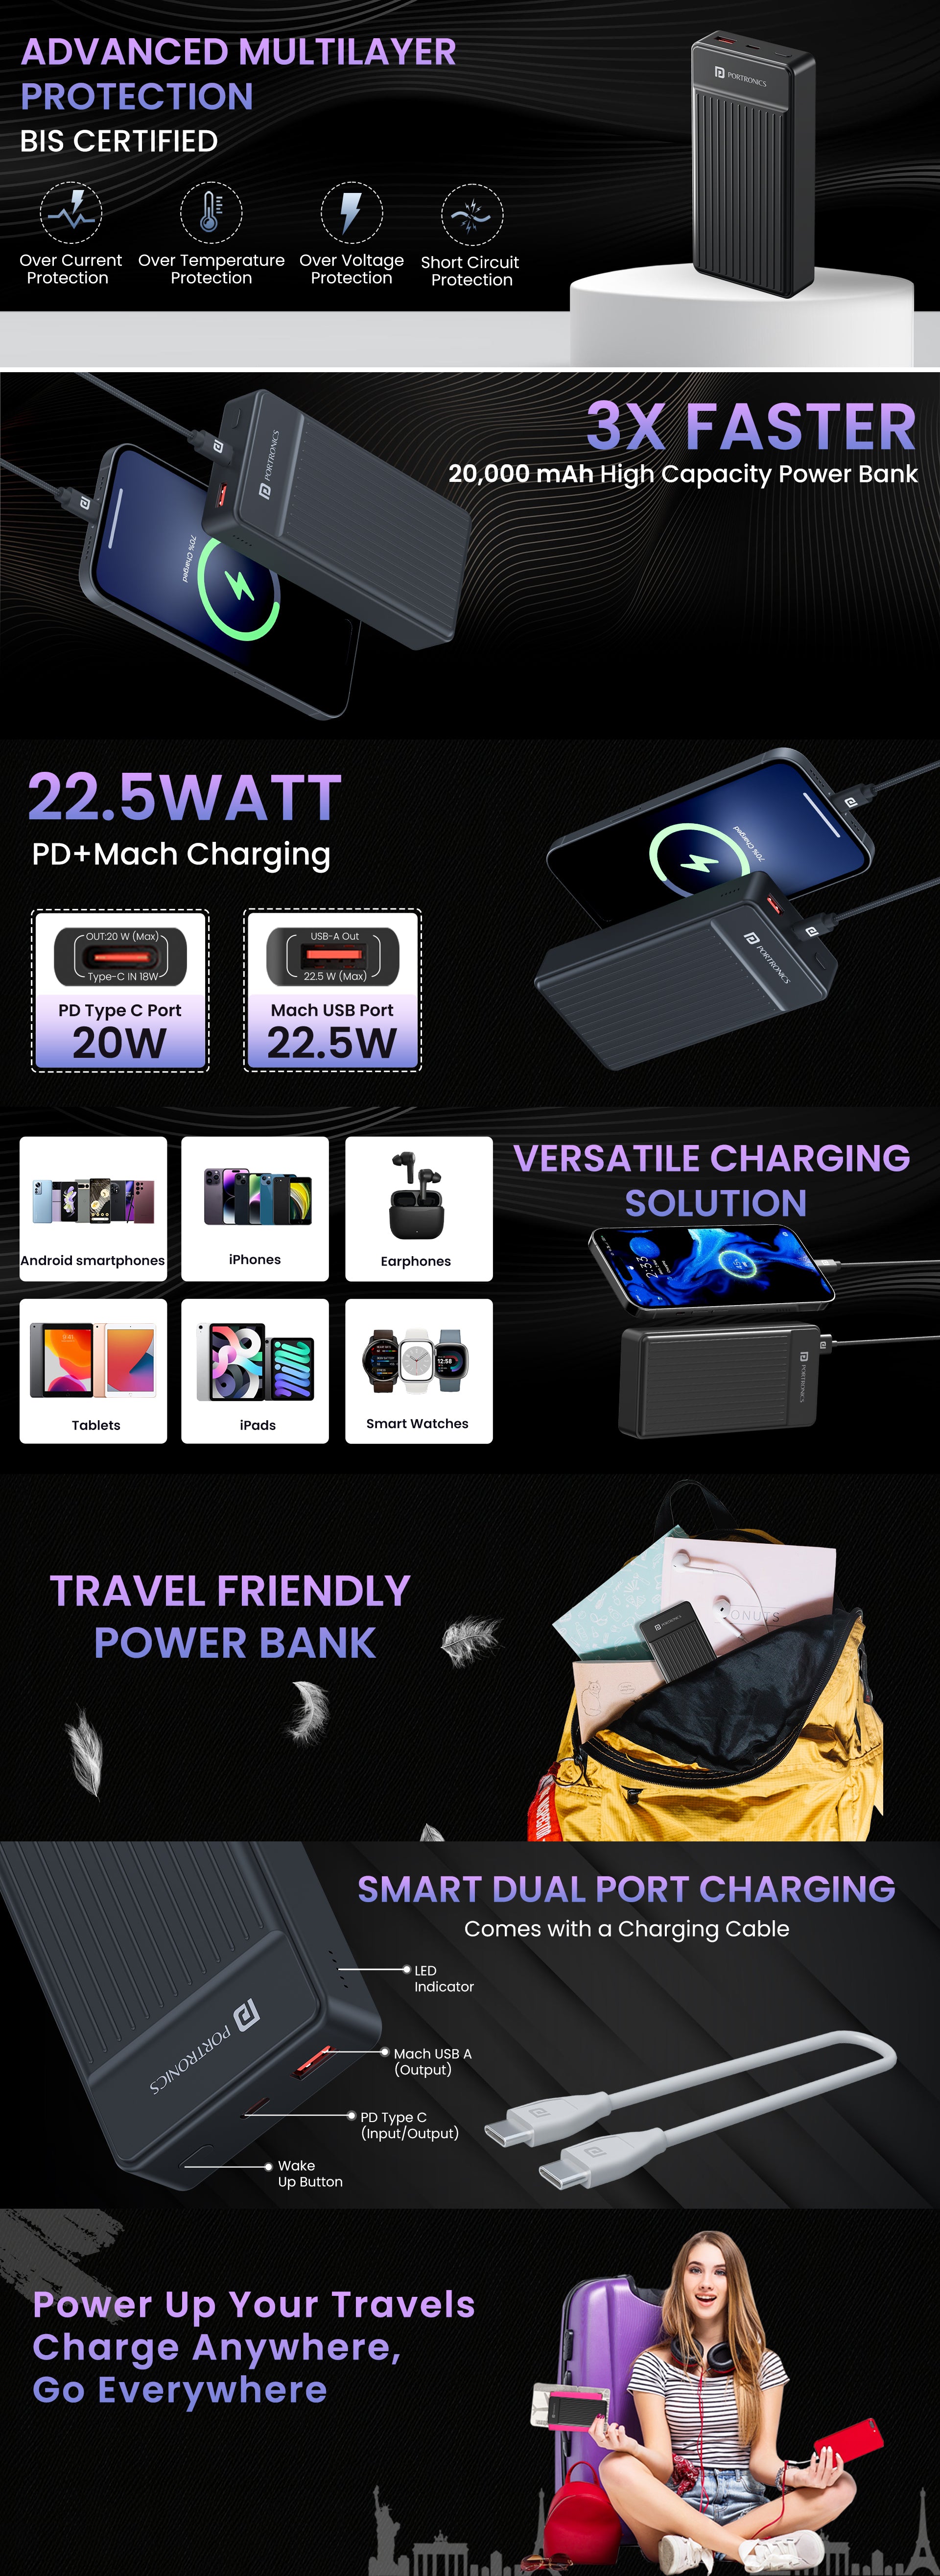 Portronics Luxcell B 10000mah Power bank with 2 output Mach USB A and Type C pd port